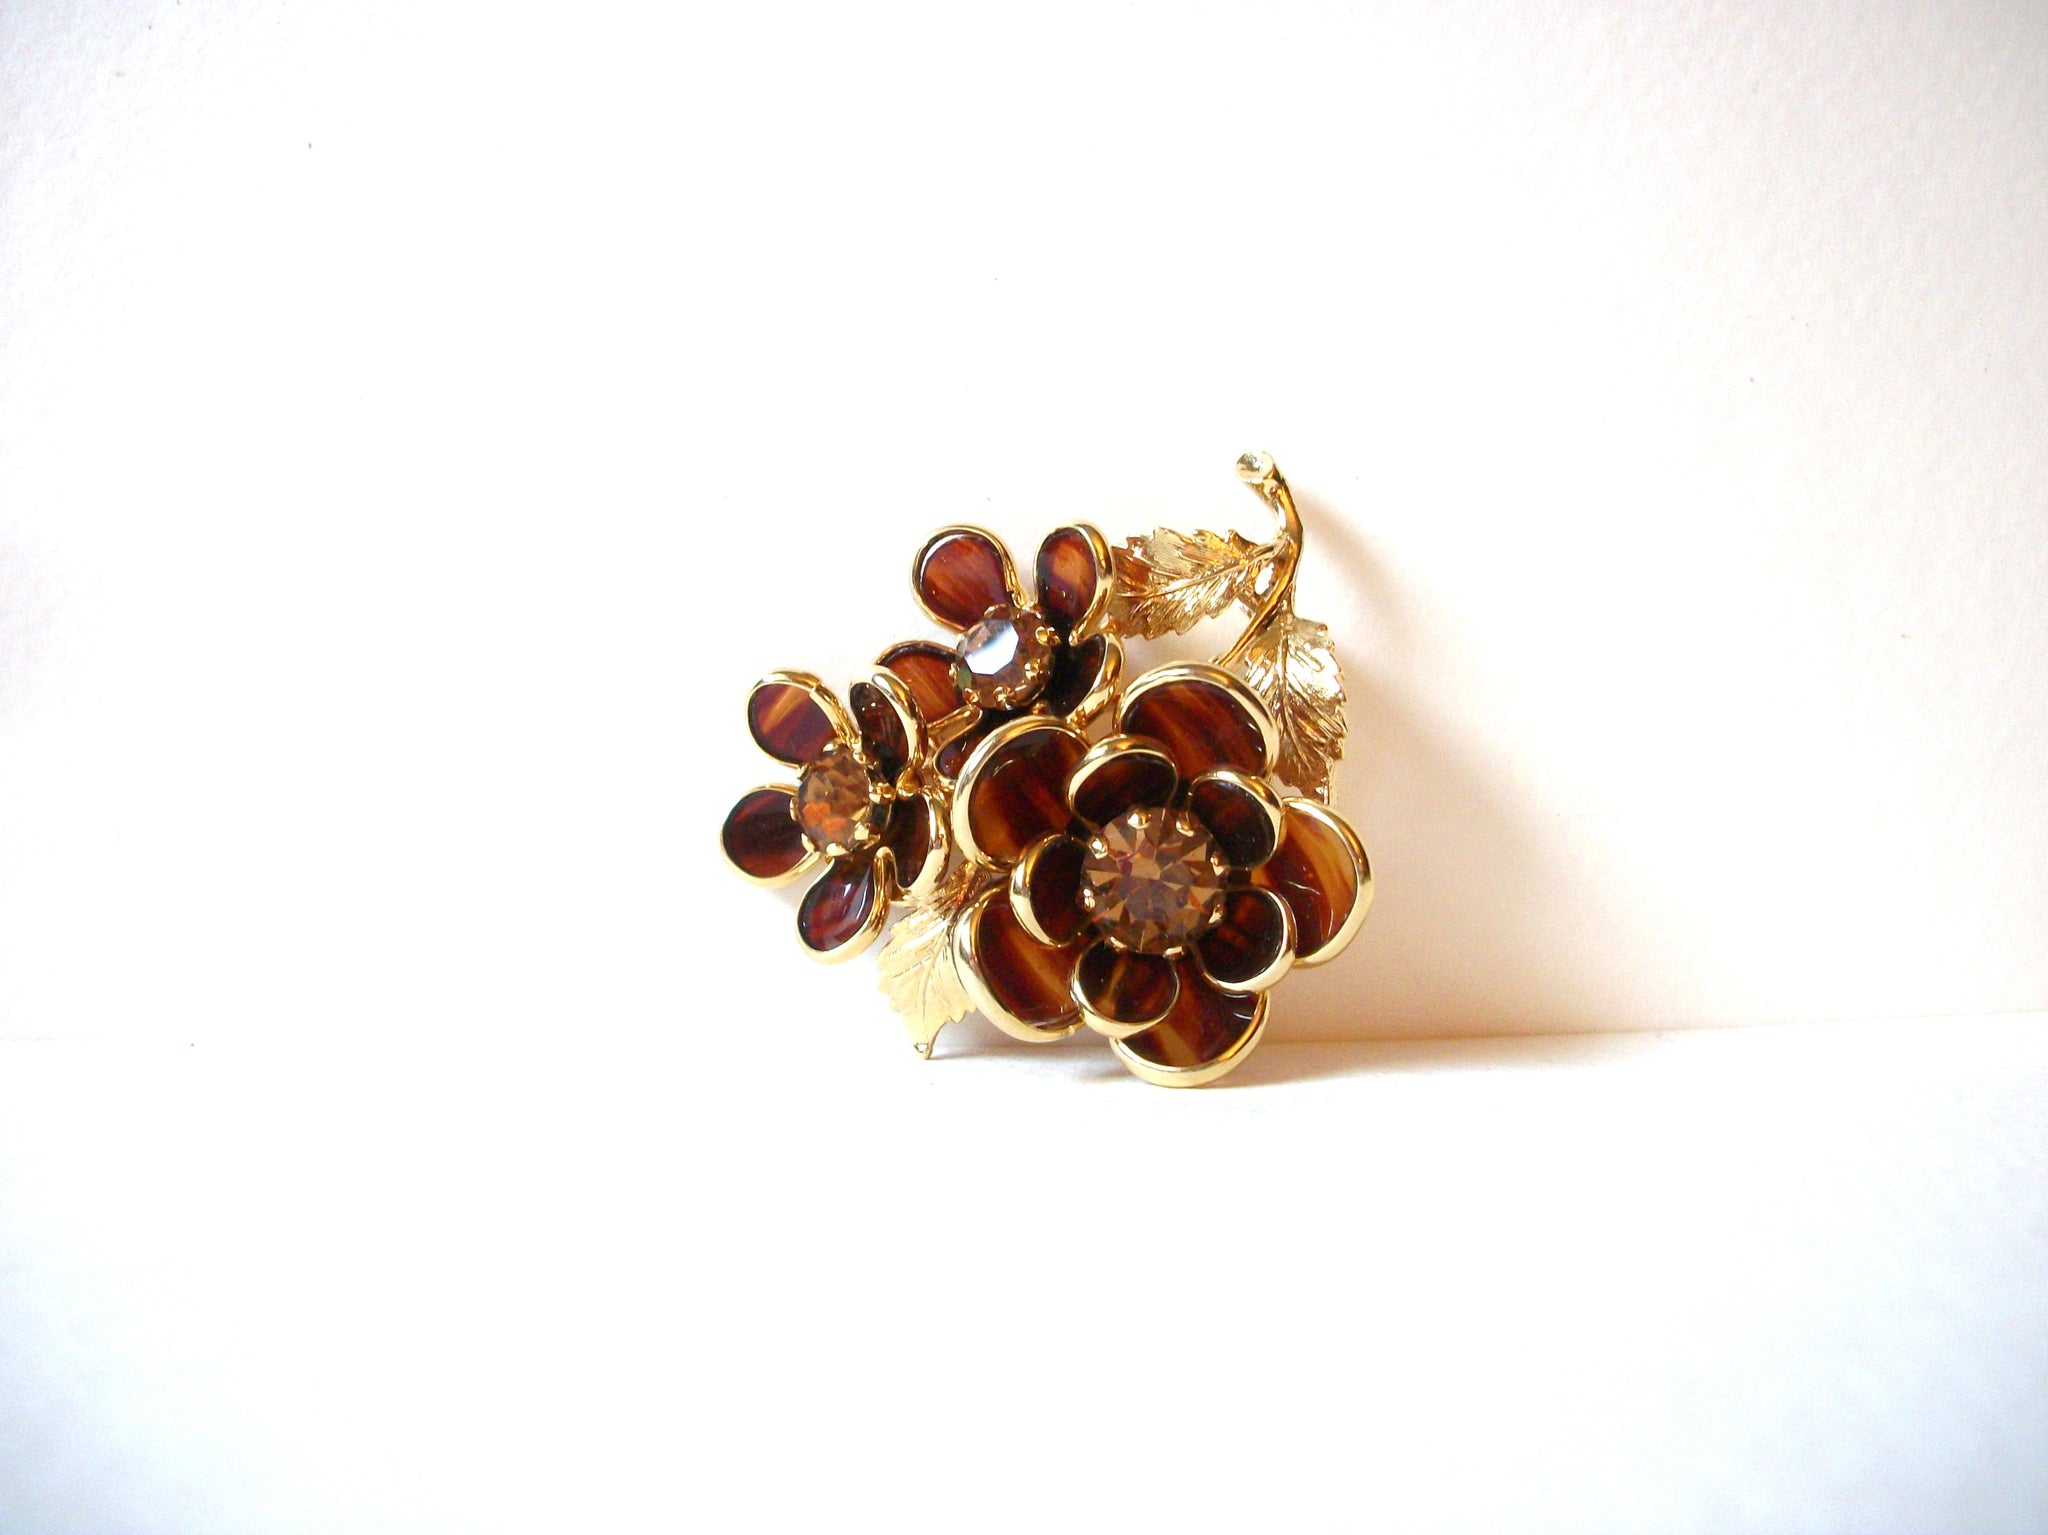 Vintage Thick Amber Tone Glass Floral Brooch Pin 71218T